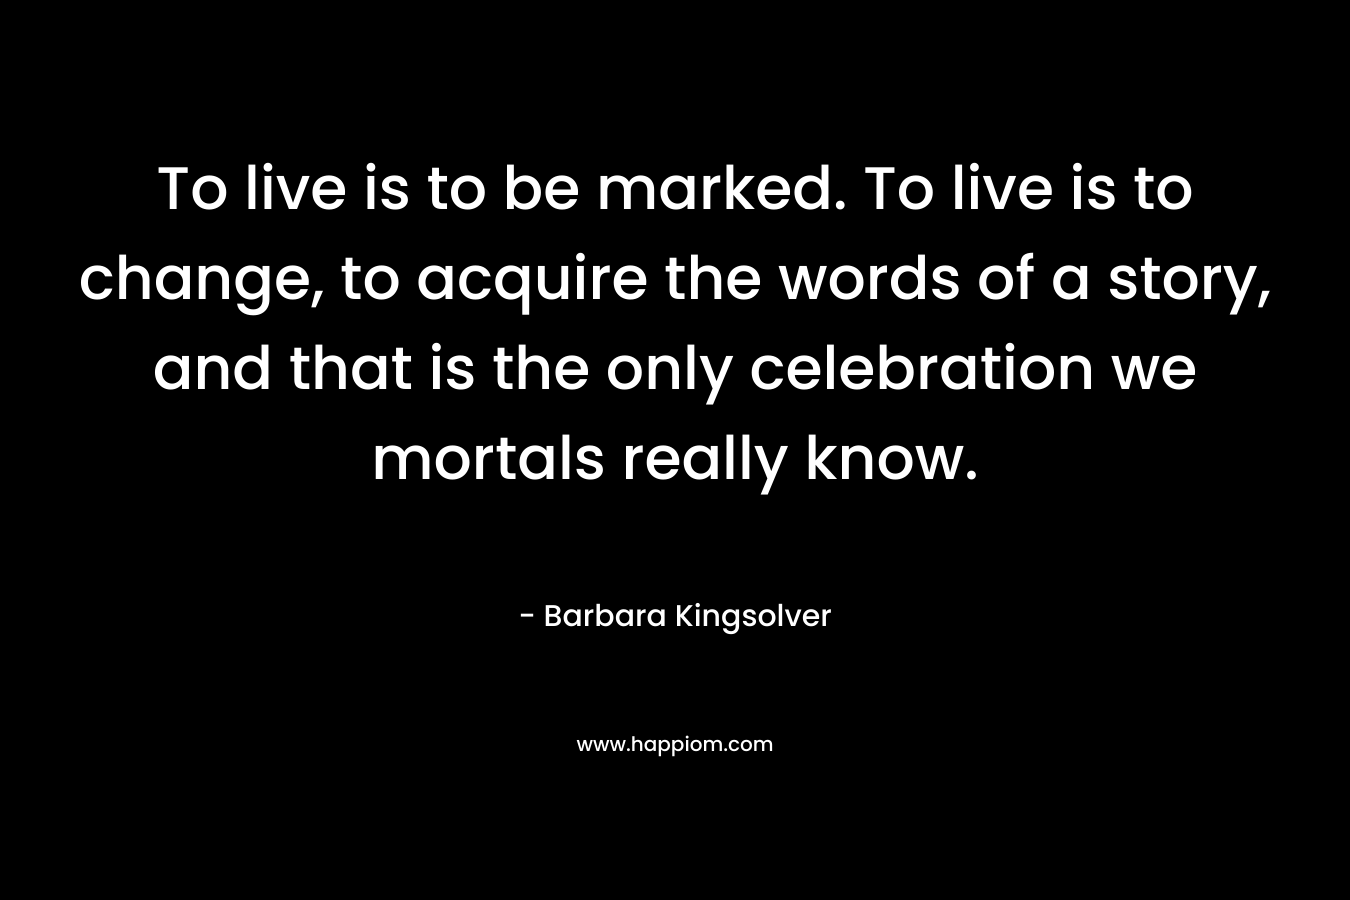 To live is to be marked. To live is to change, to acquire the words of a story, and that is the only celebration we mortals really know. – Barbara Kingsolver